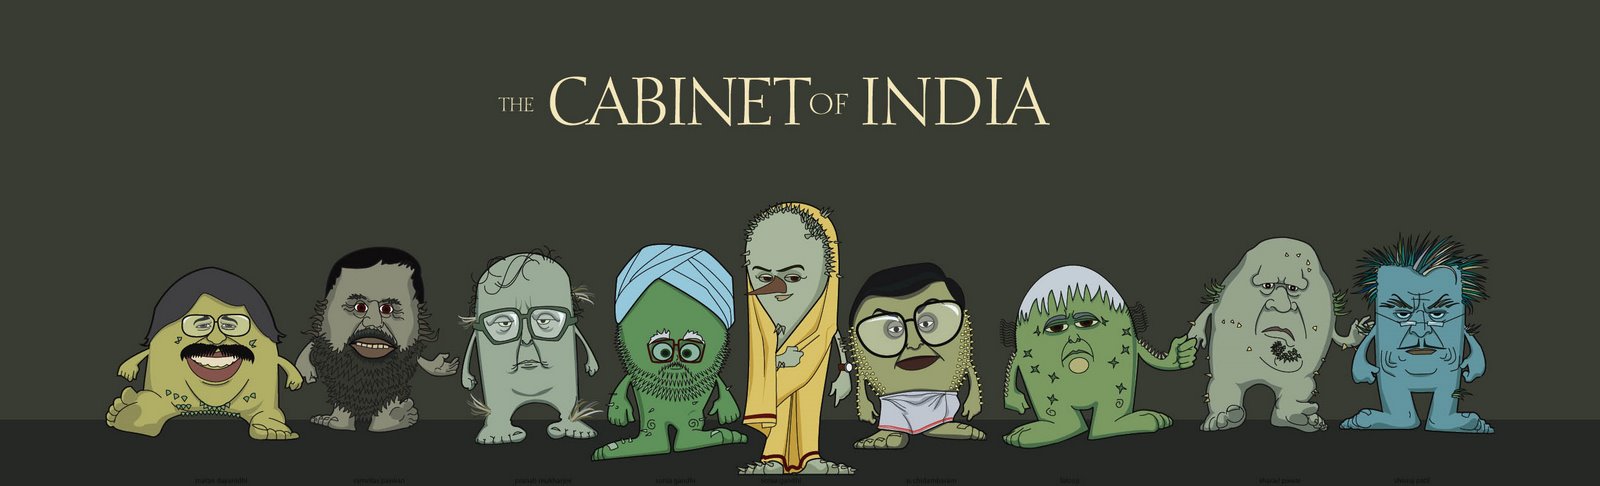 [the+cabinet+of+india.jpg]